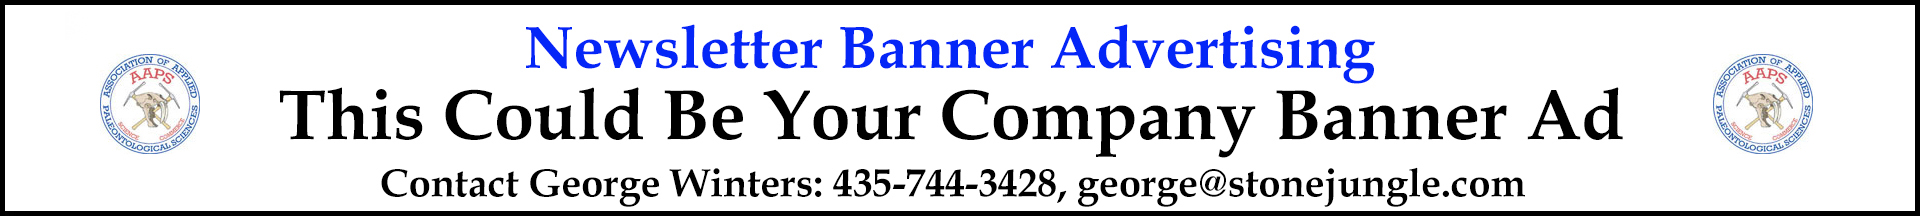 This could be your banner advertisement!